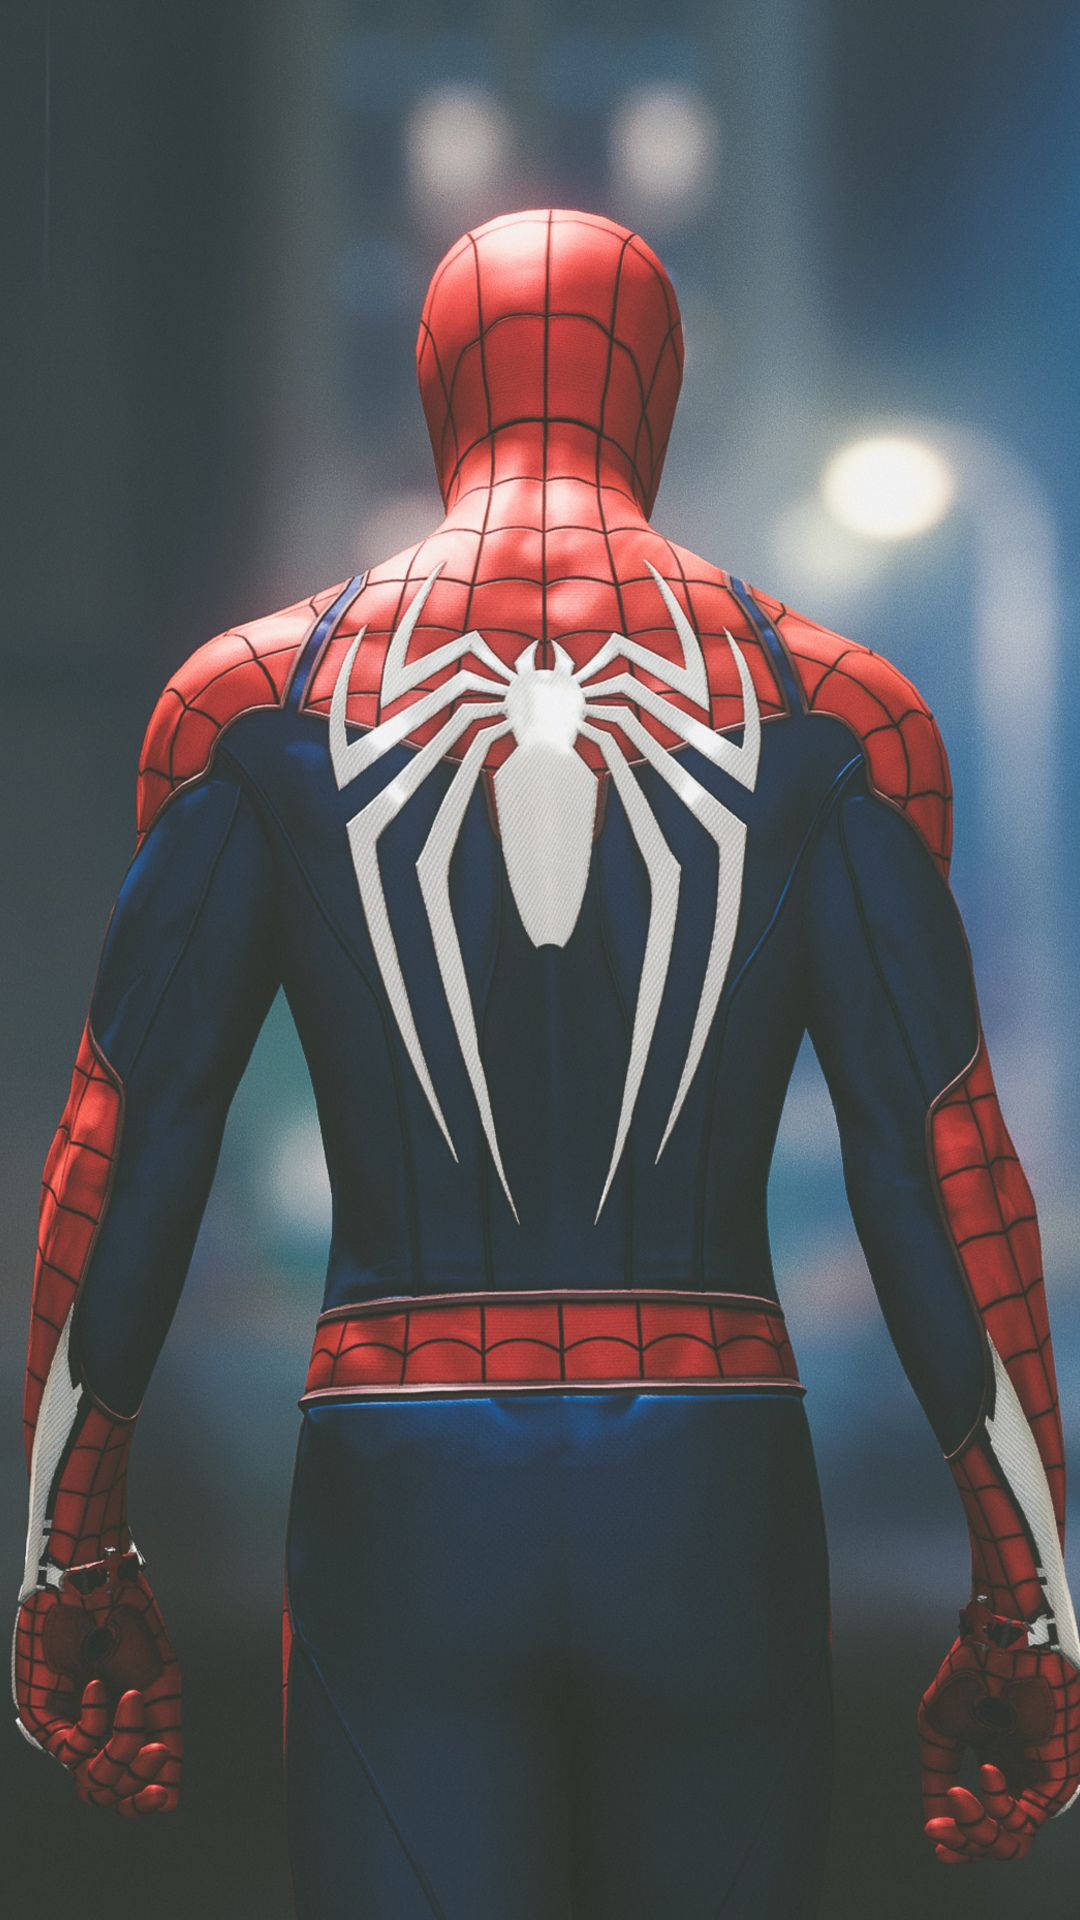 100+] 4K Spider Man Wallpapers For Free | Wallpapers.Com